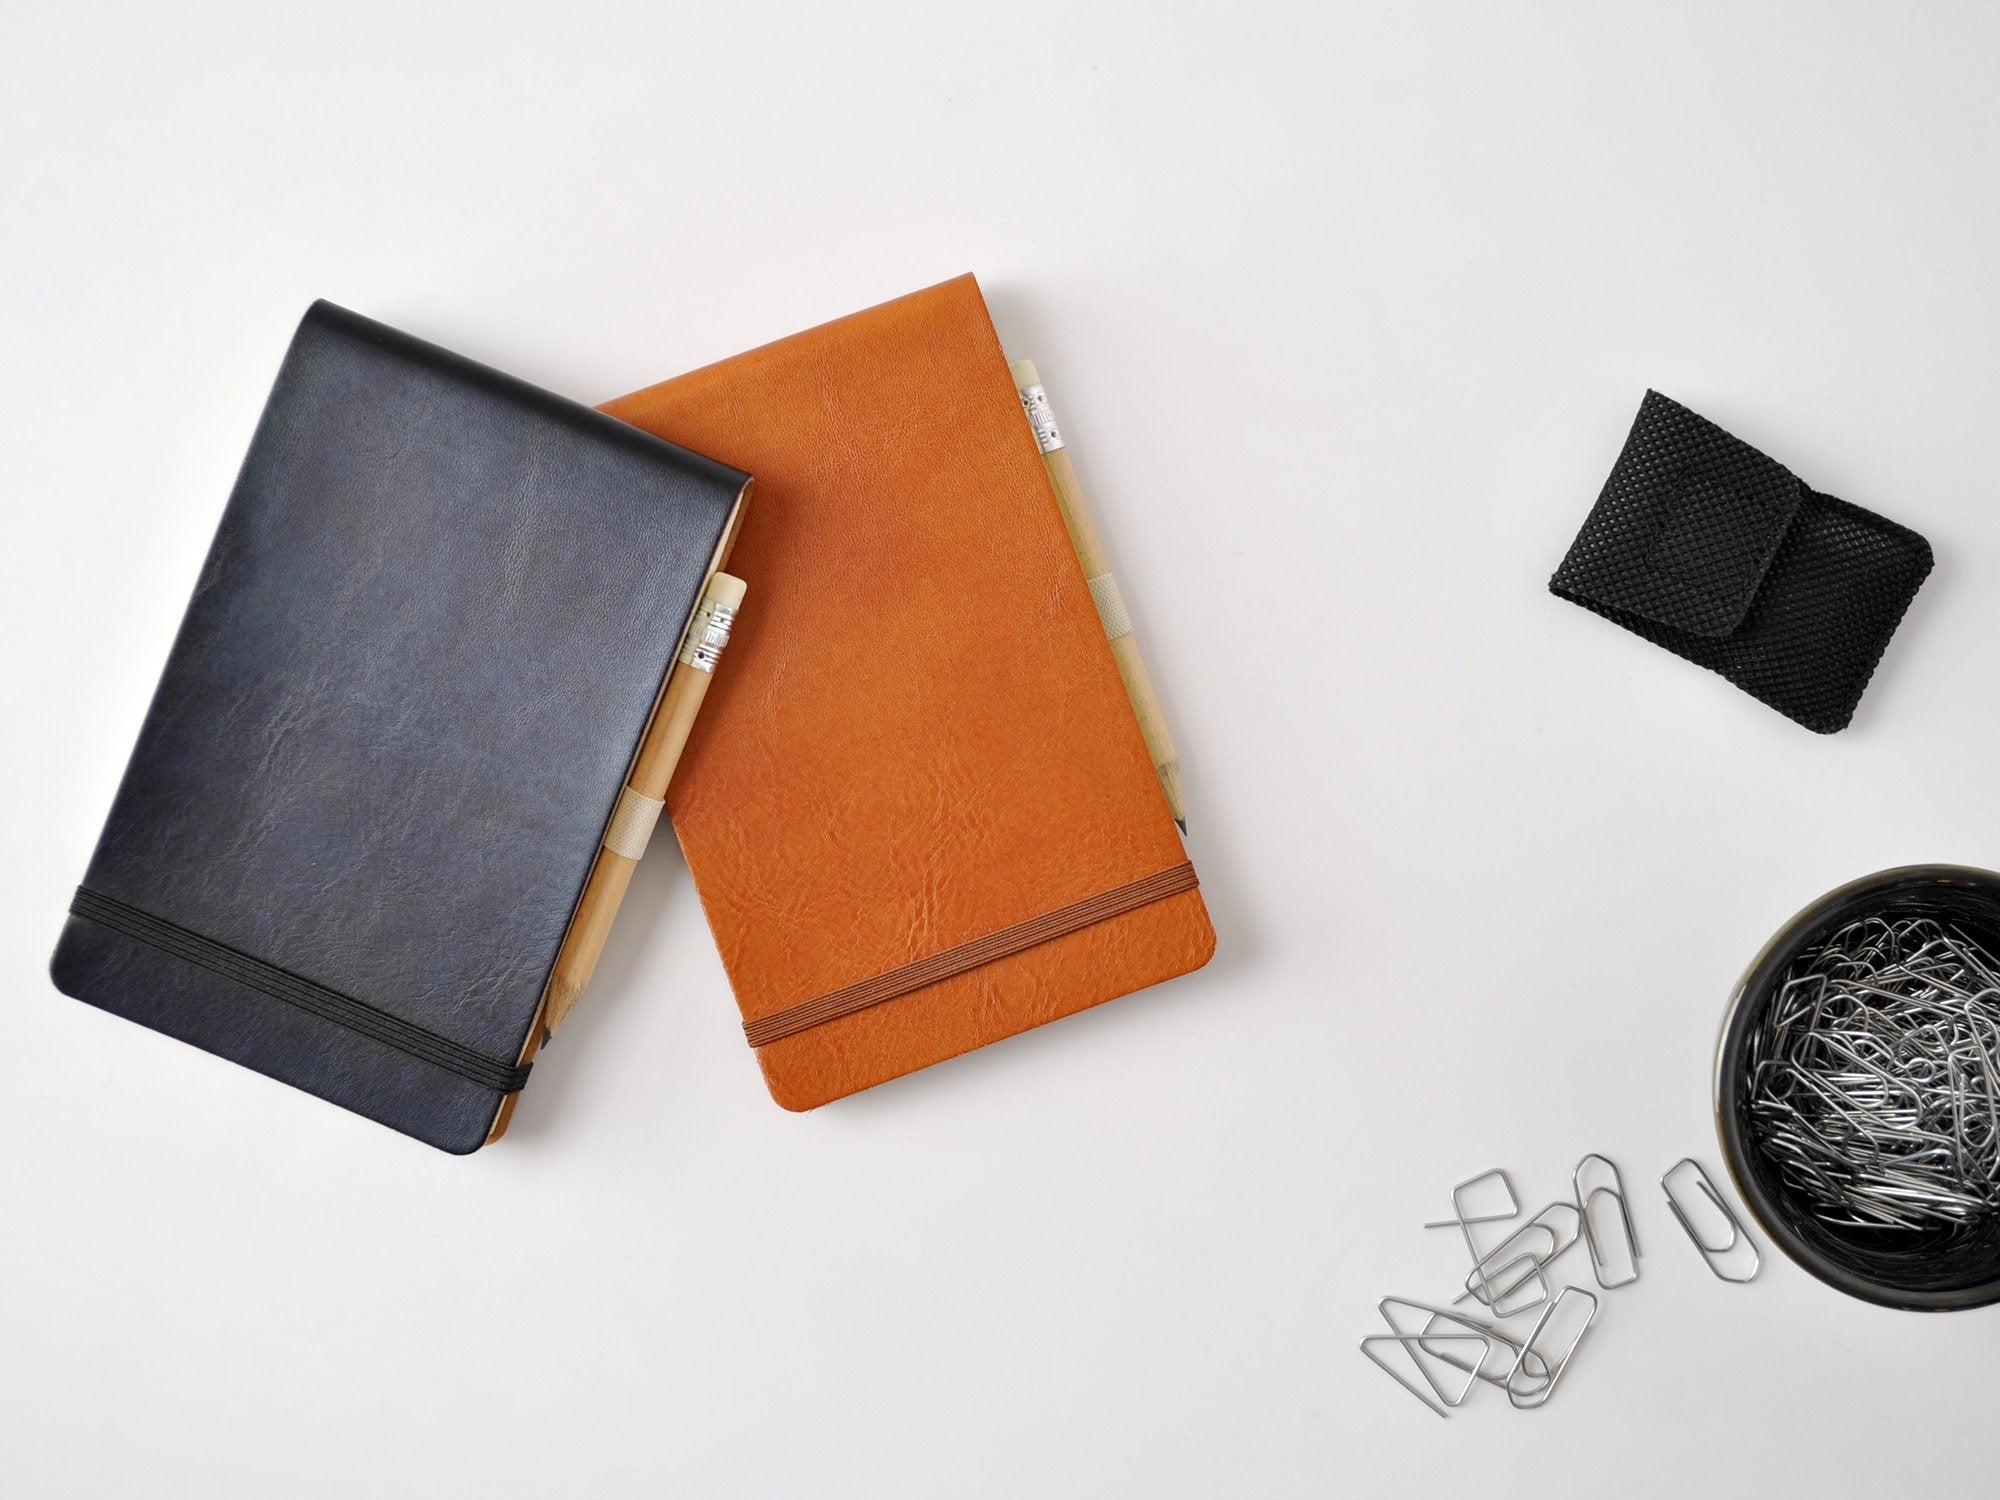 Chelsea textured-leather notebook